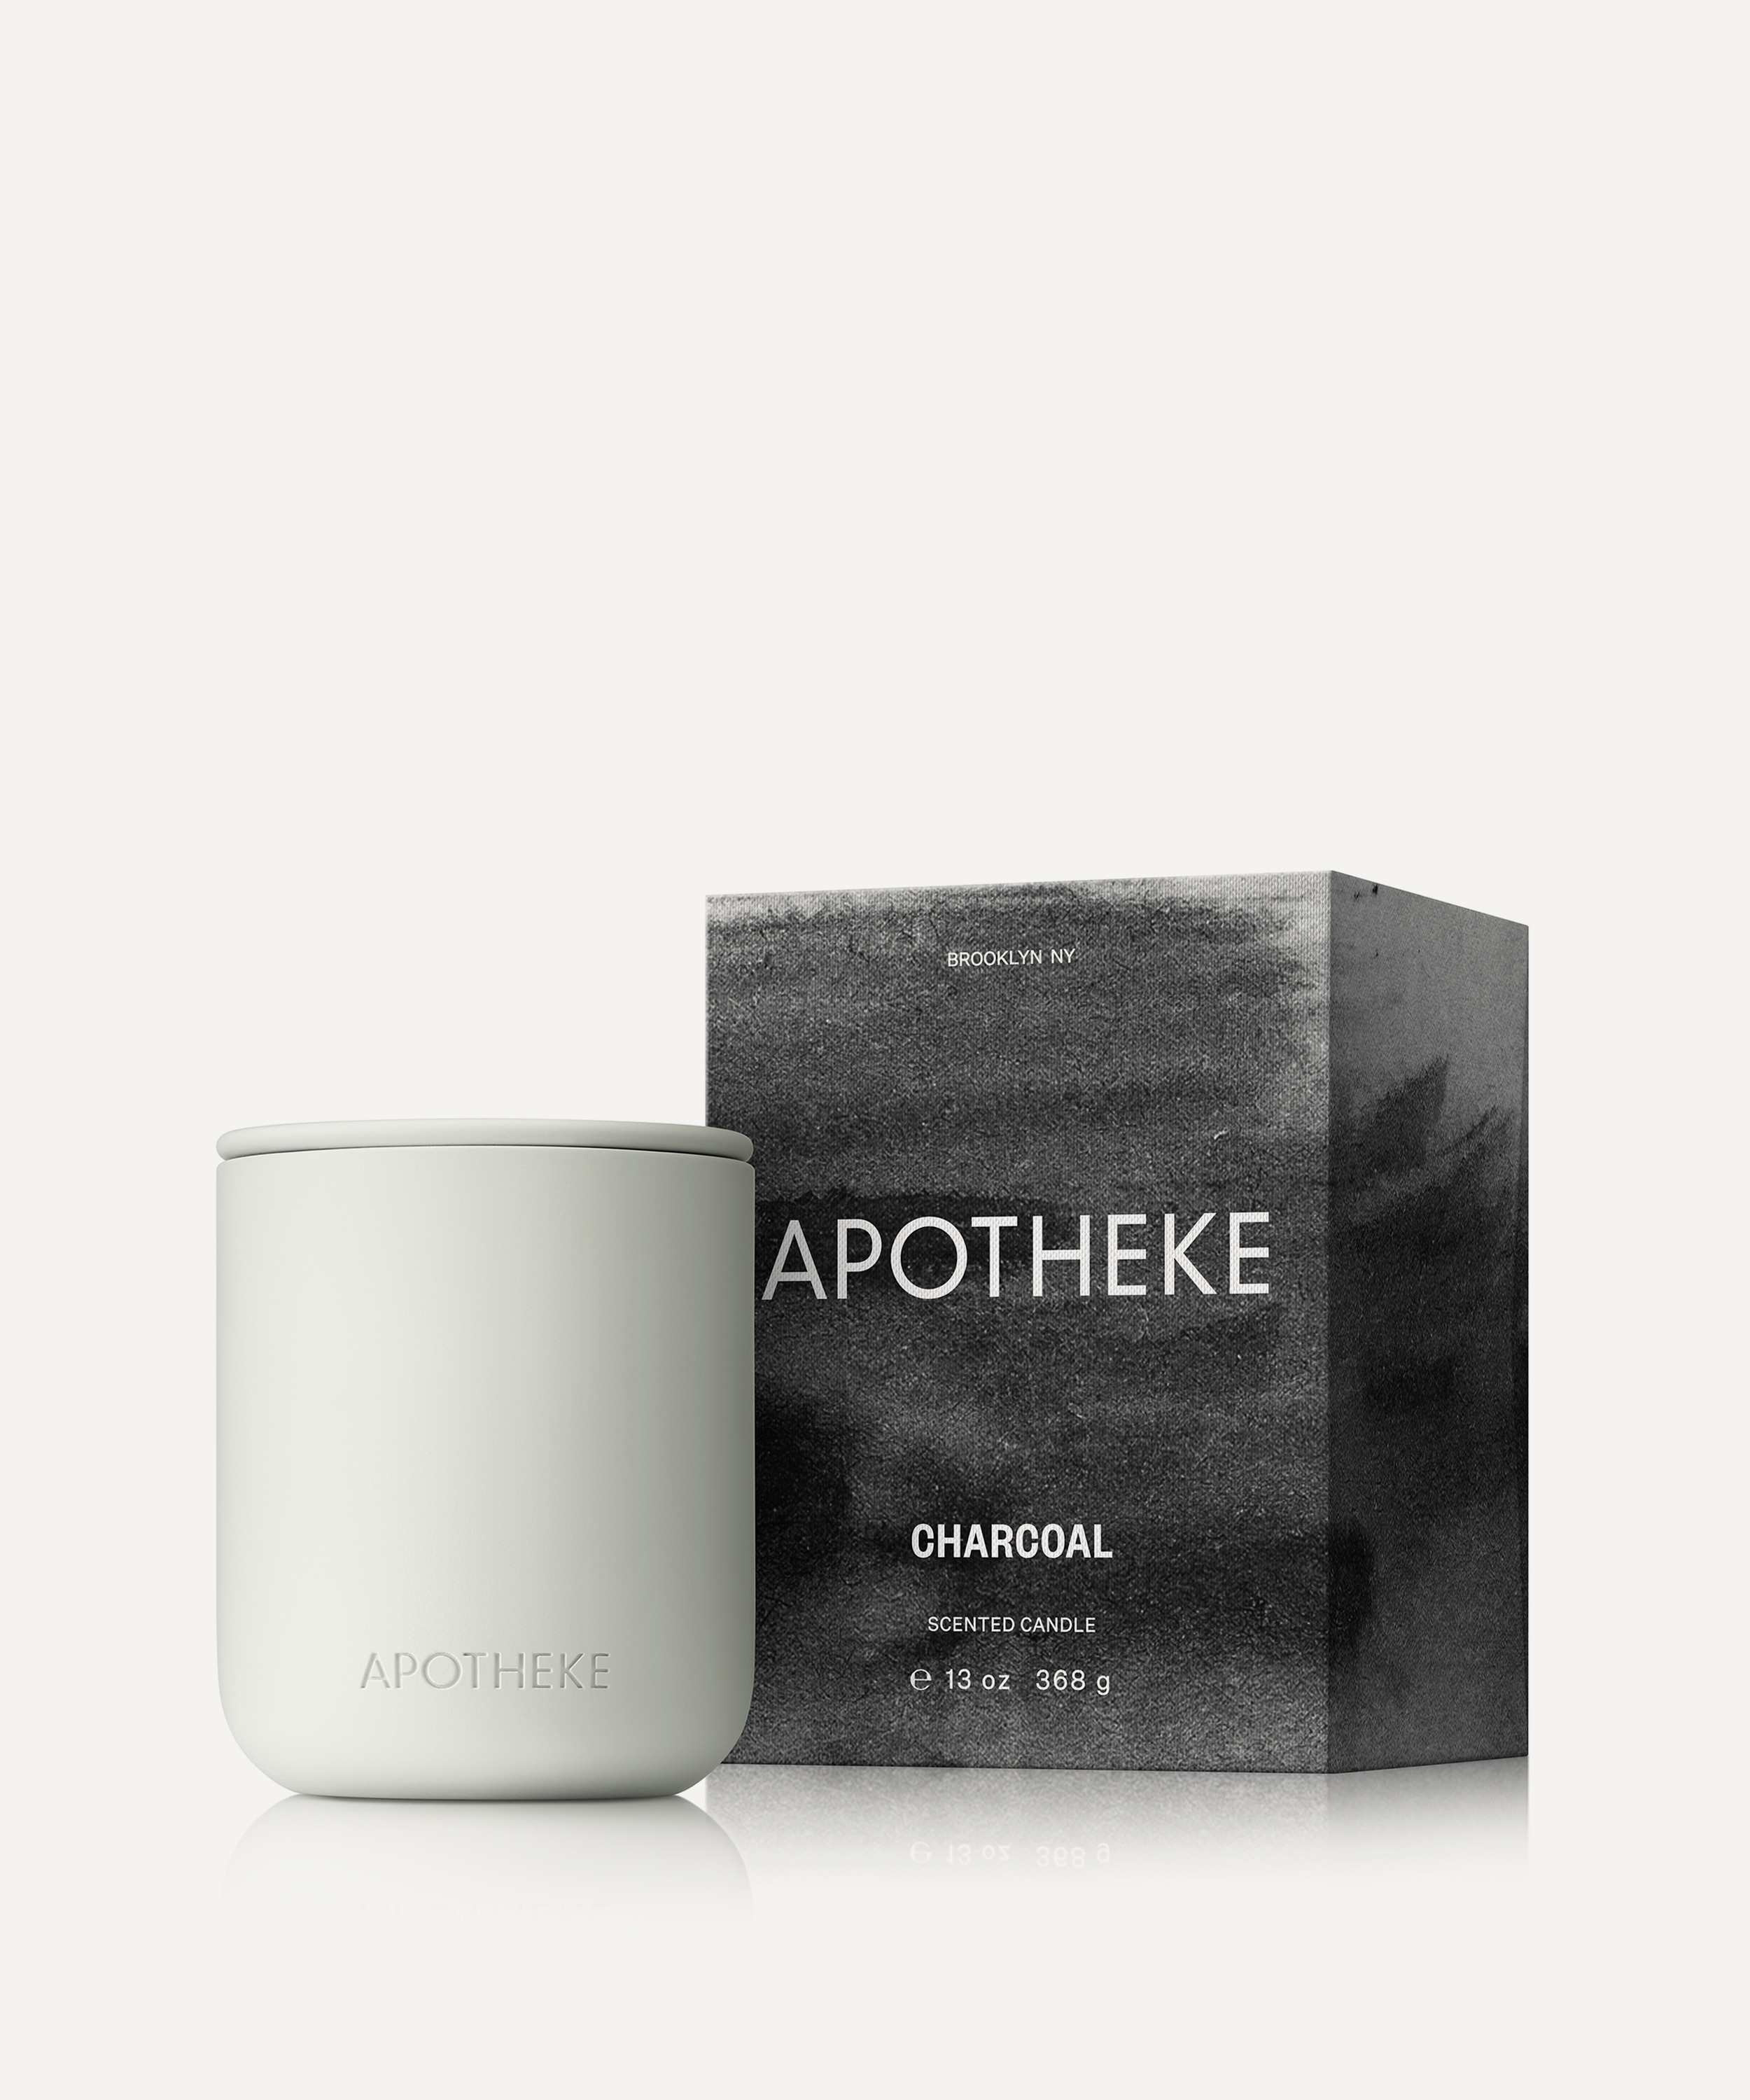 Apotheke - Charcoal Two-Wick Ceramic Candle 370g image number 0